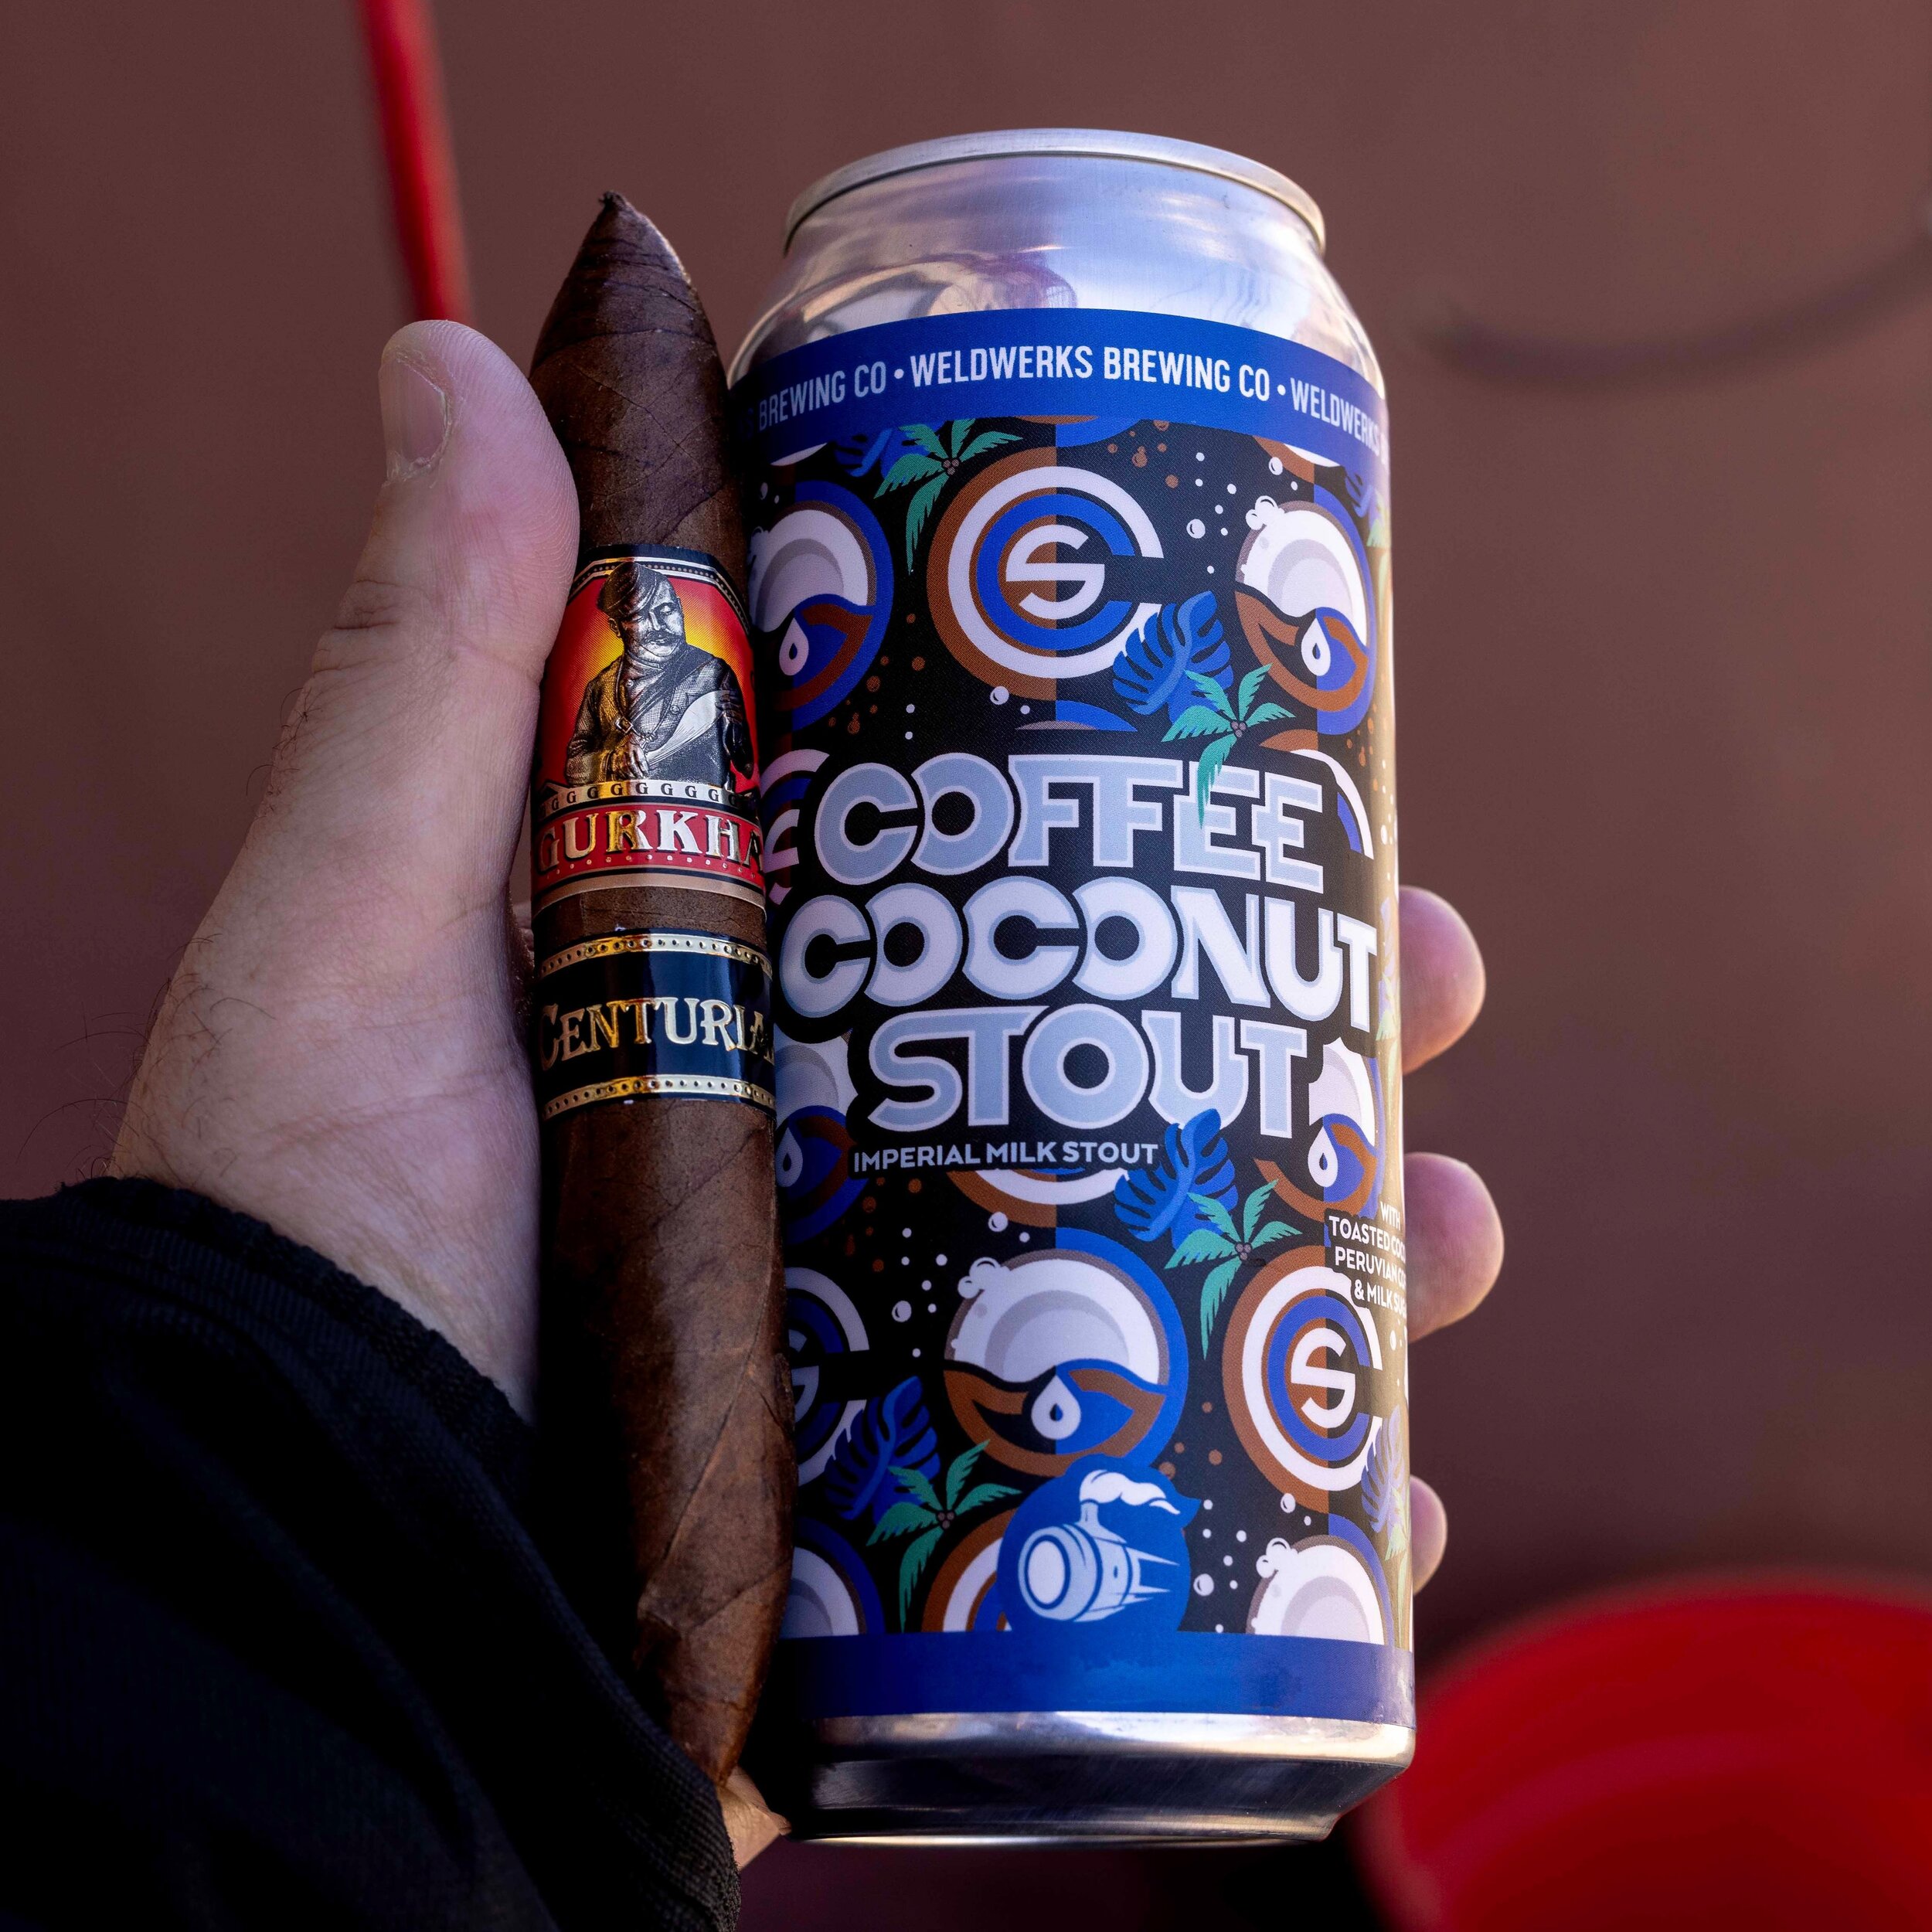 Coffee Coconut Stout: Because Your Beer Was Clearly Lacking a Barista&rsquo;s Touch.

Cigar: Gurkha Centurian Double Perfecto.